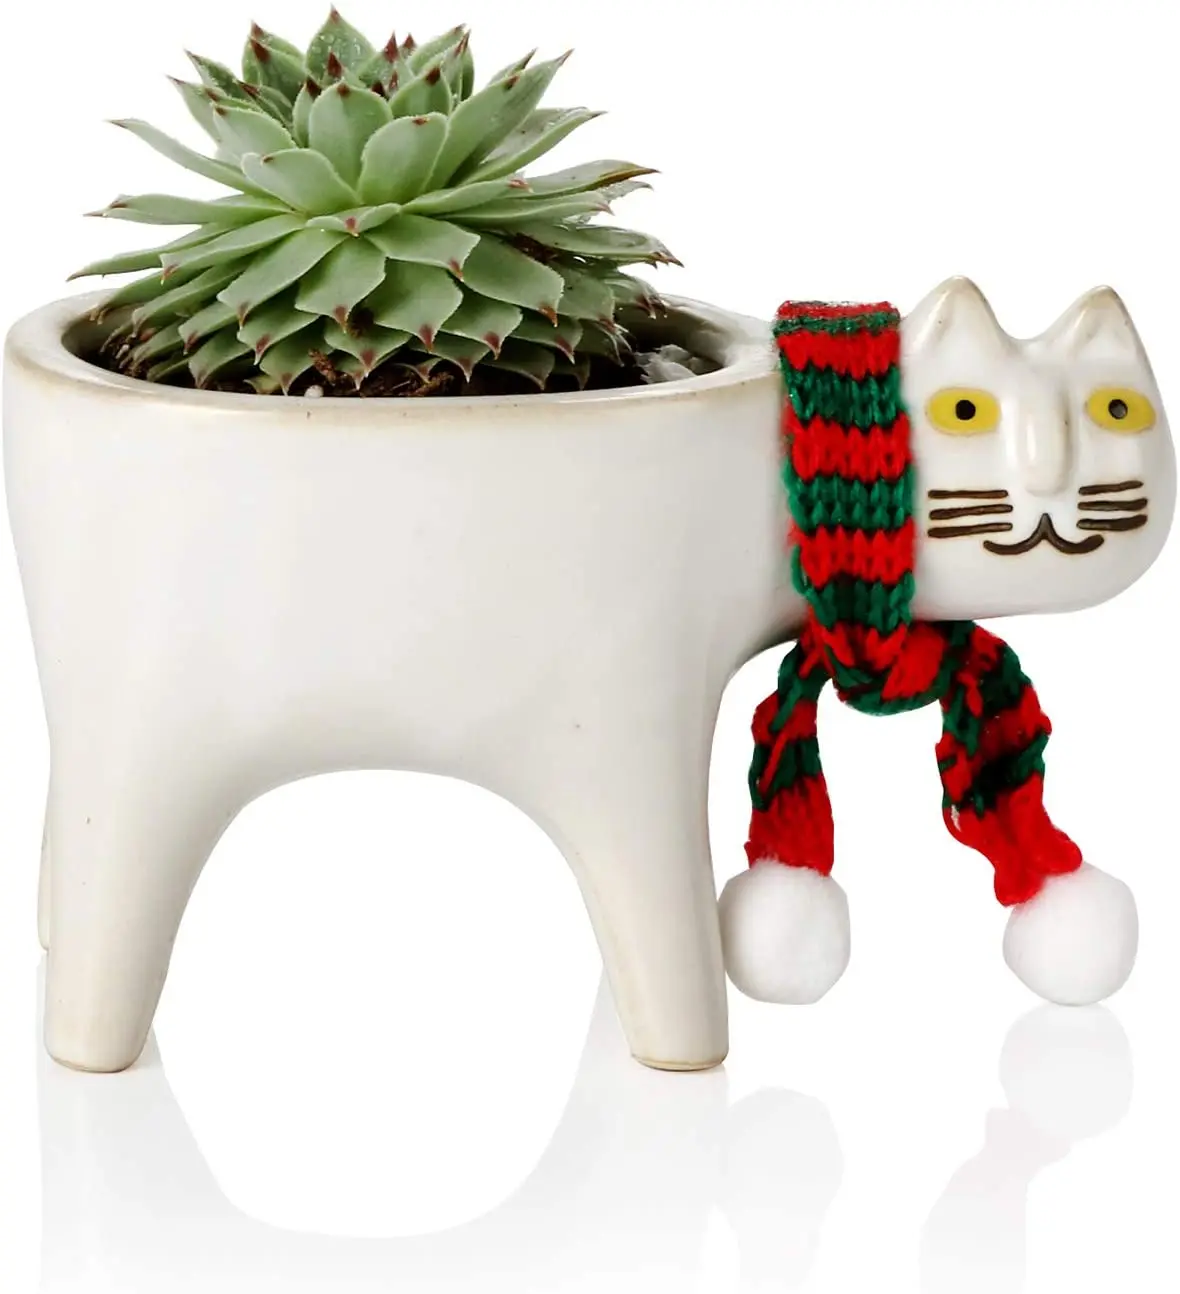 

Amazon Hot Sale Ceramic Flower Planter Succulent Animal Kitty Indoor Home Decor Perfect Cat Lover Plant Gift, Shown